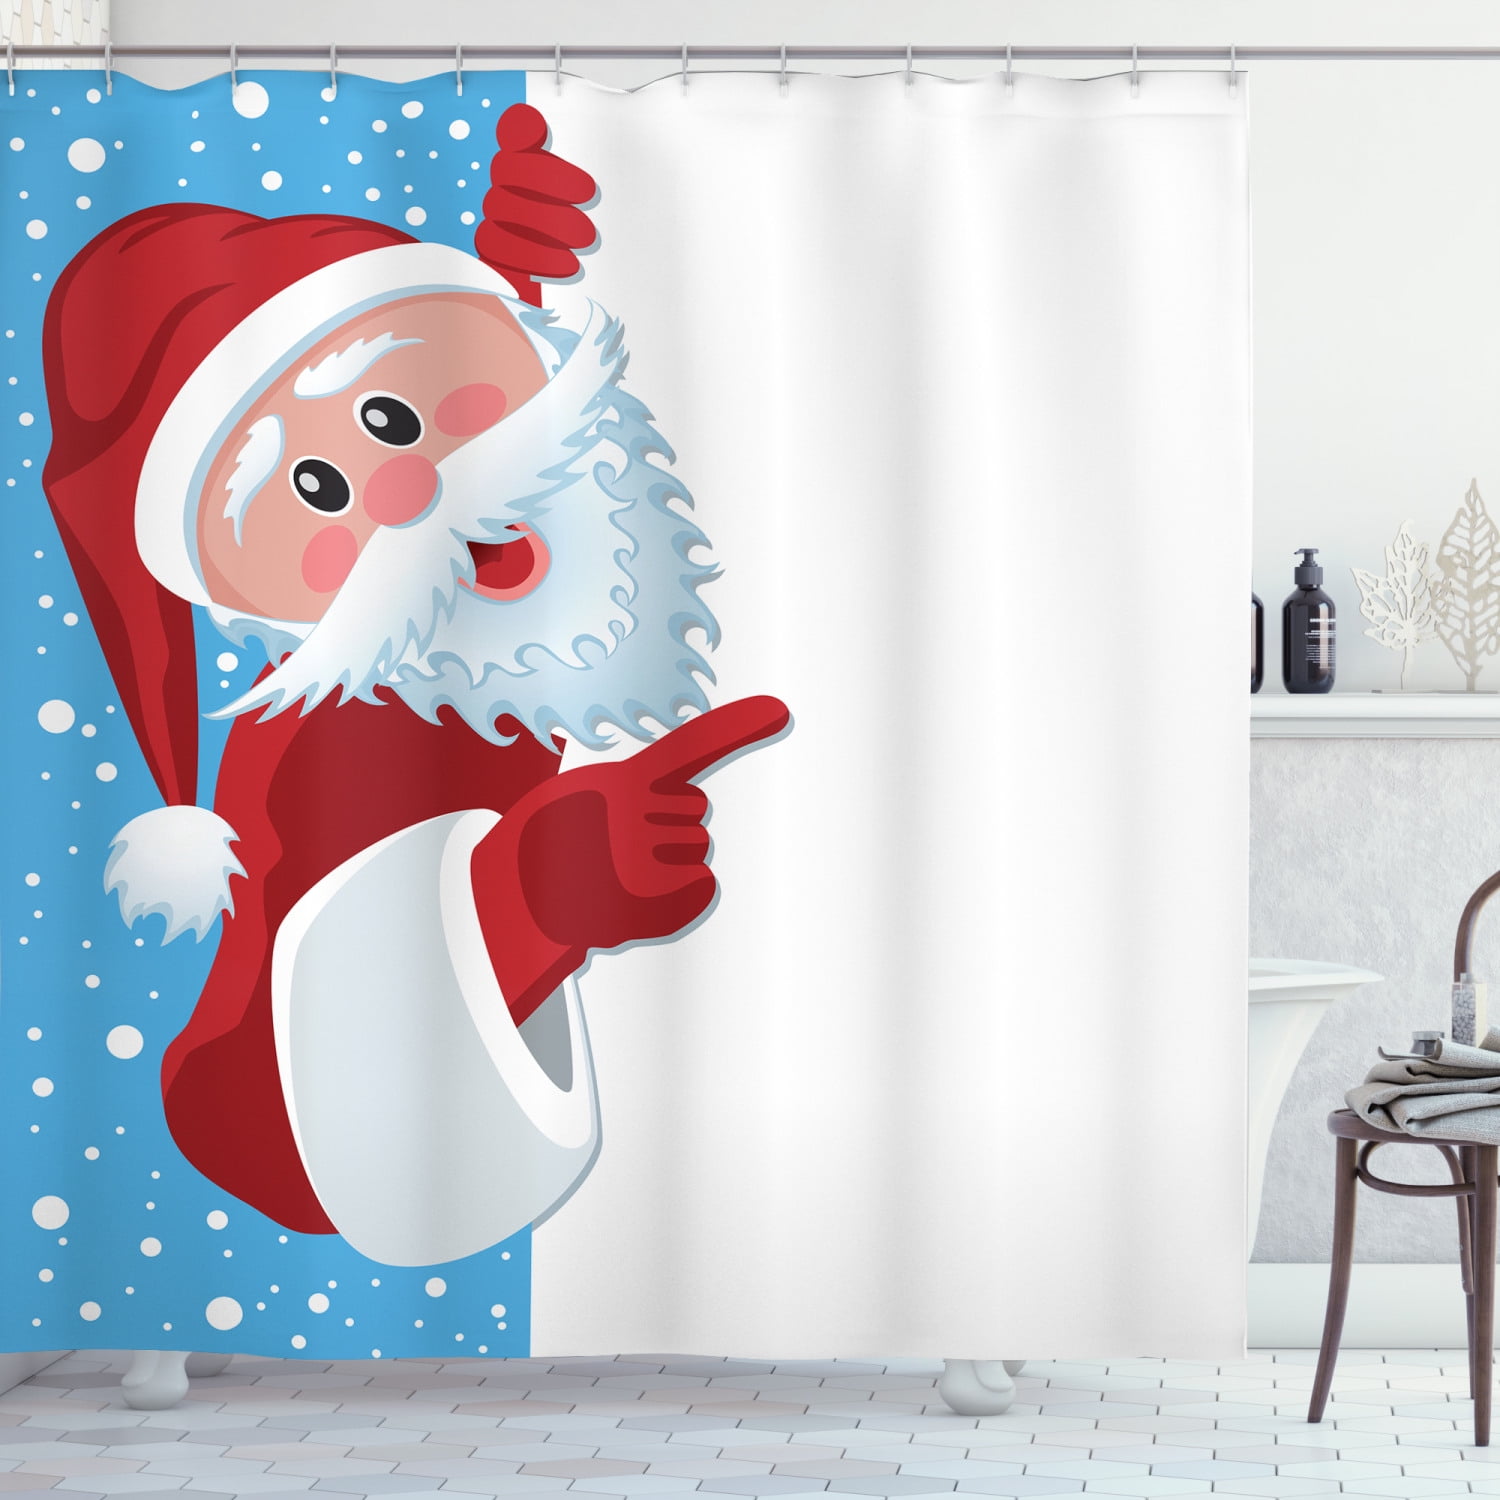 Details about   Chritmas Fireplace Santa Claus and Gift Shower Curtain Set Waterproof Fabric 72" 